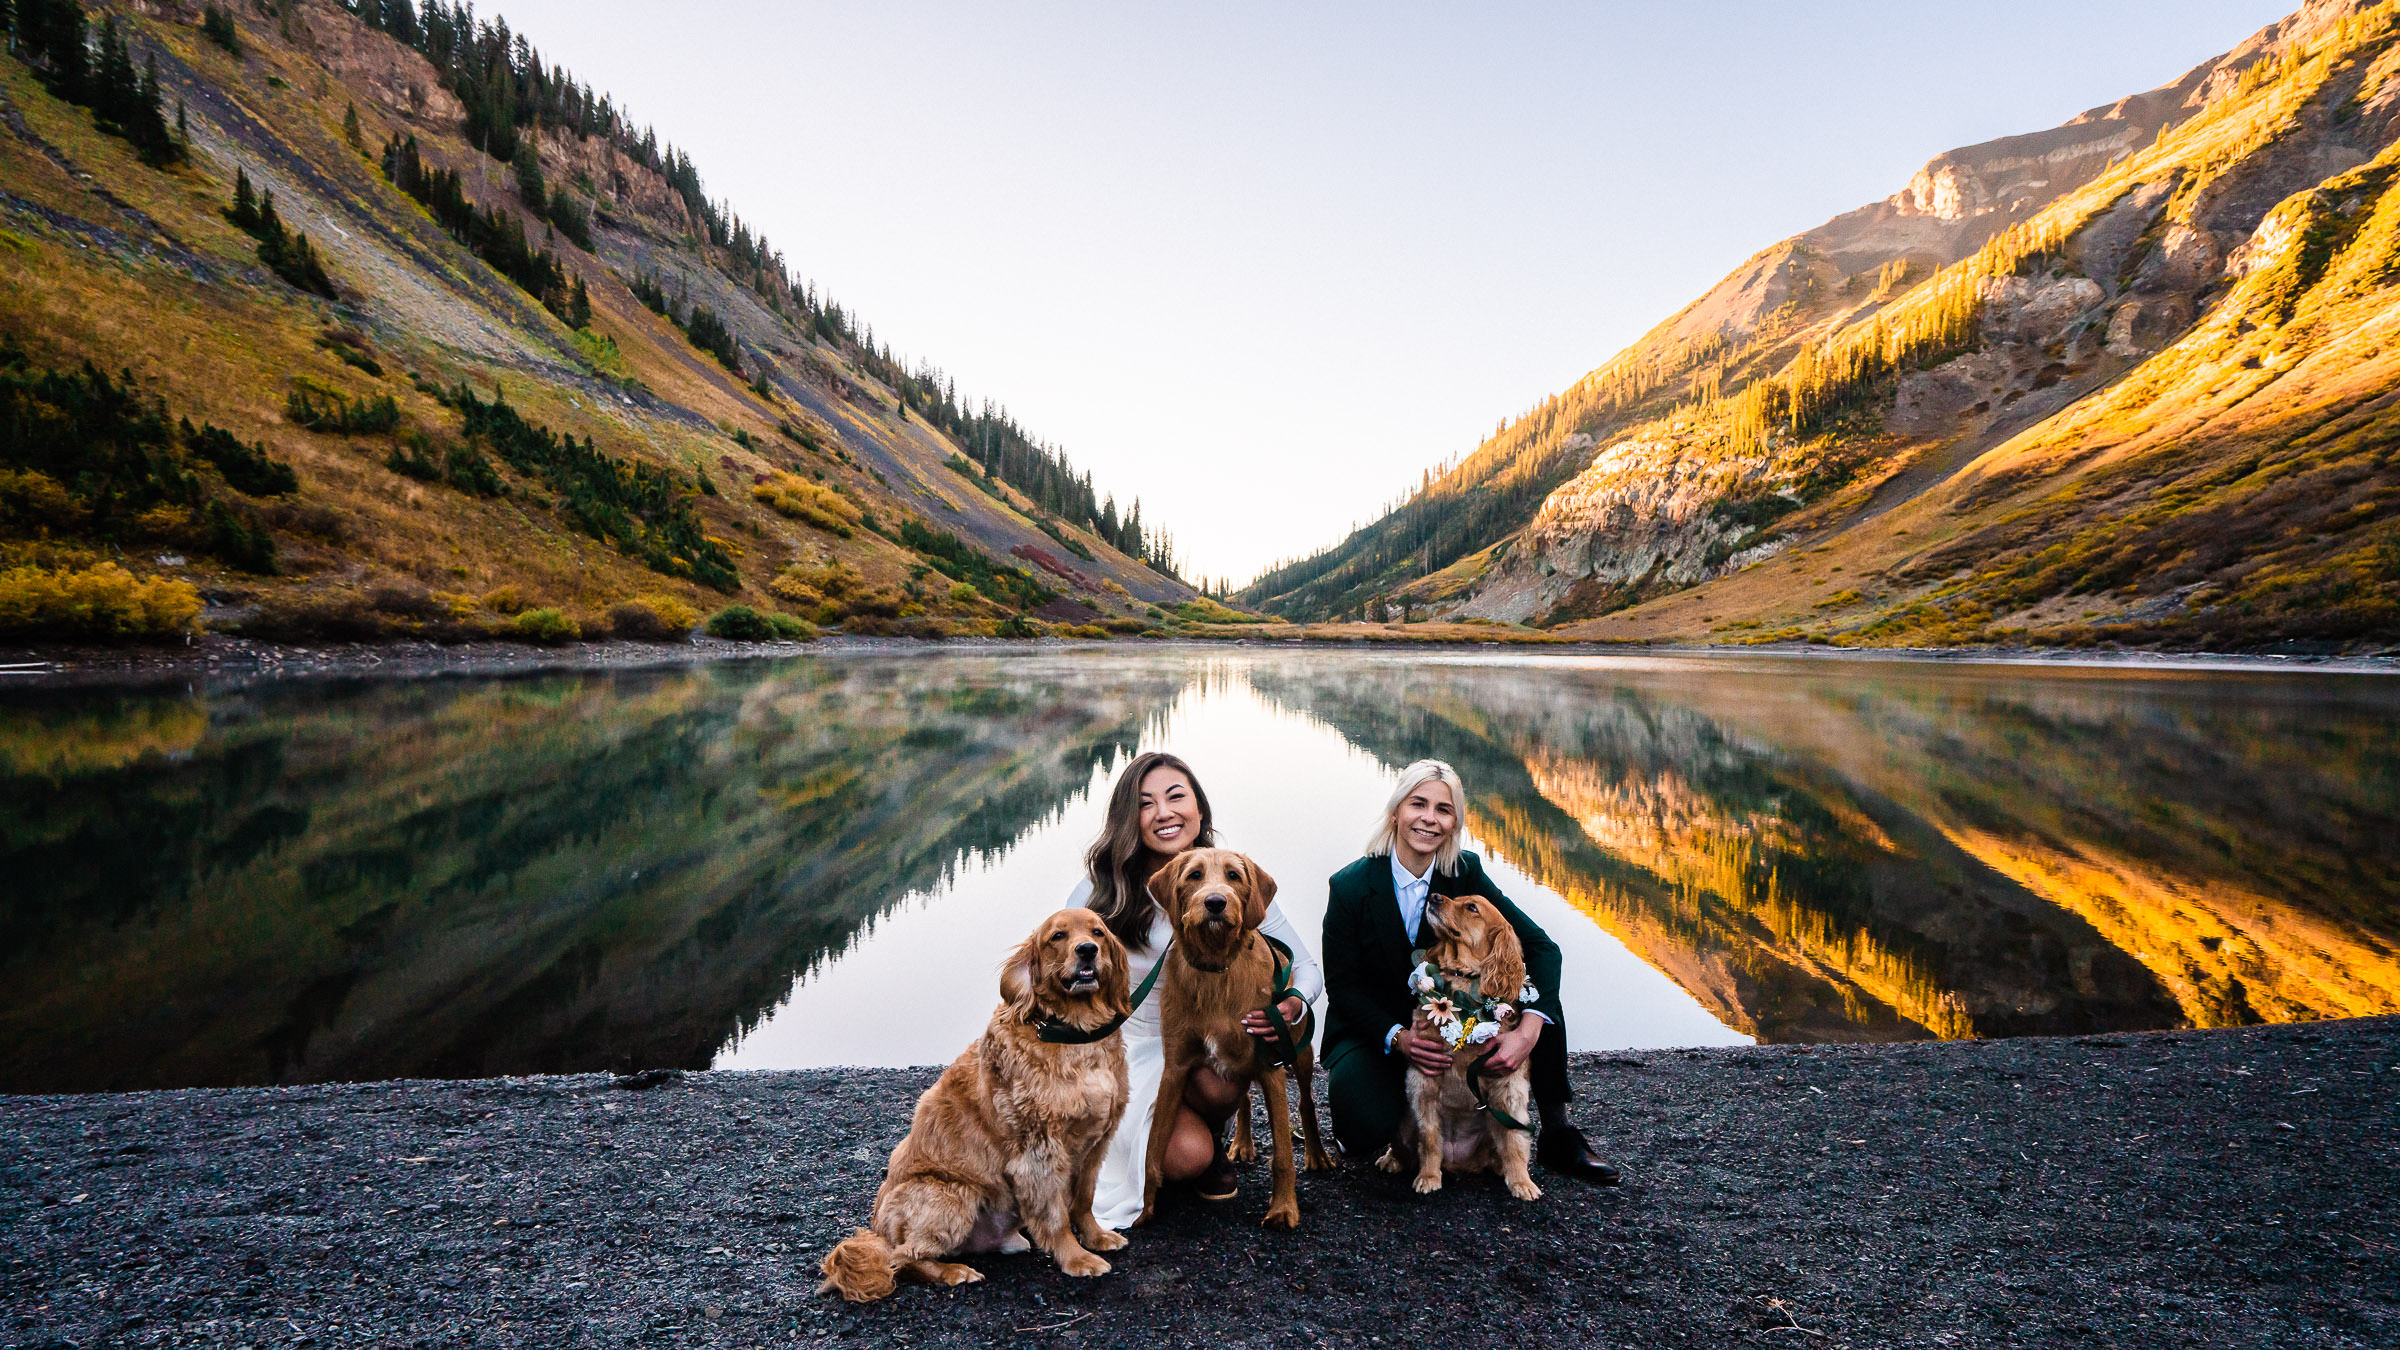 A beautiful lesbian elopement day with dogs